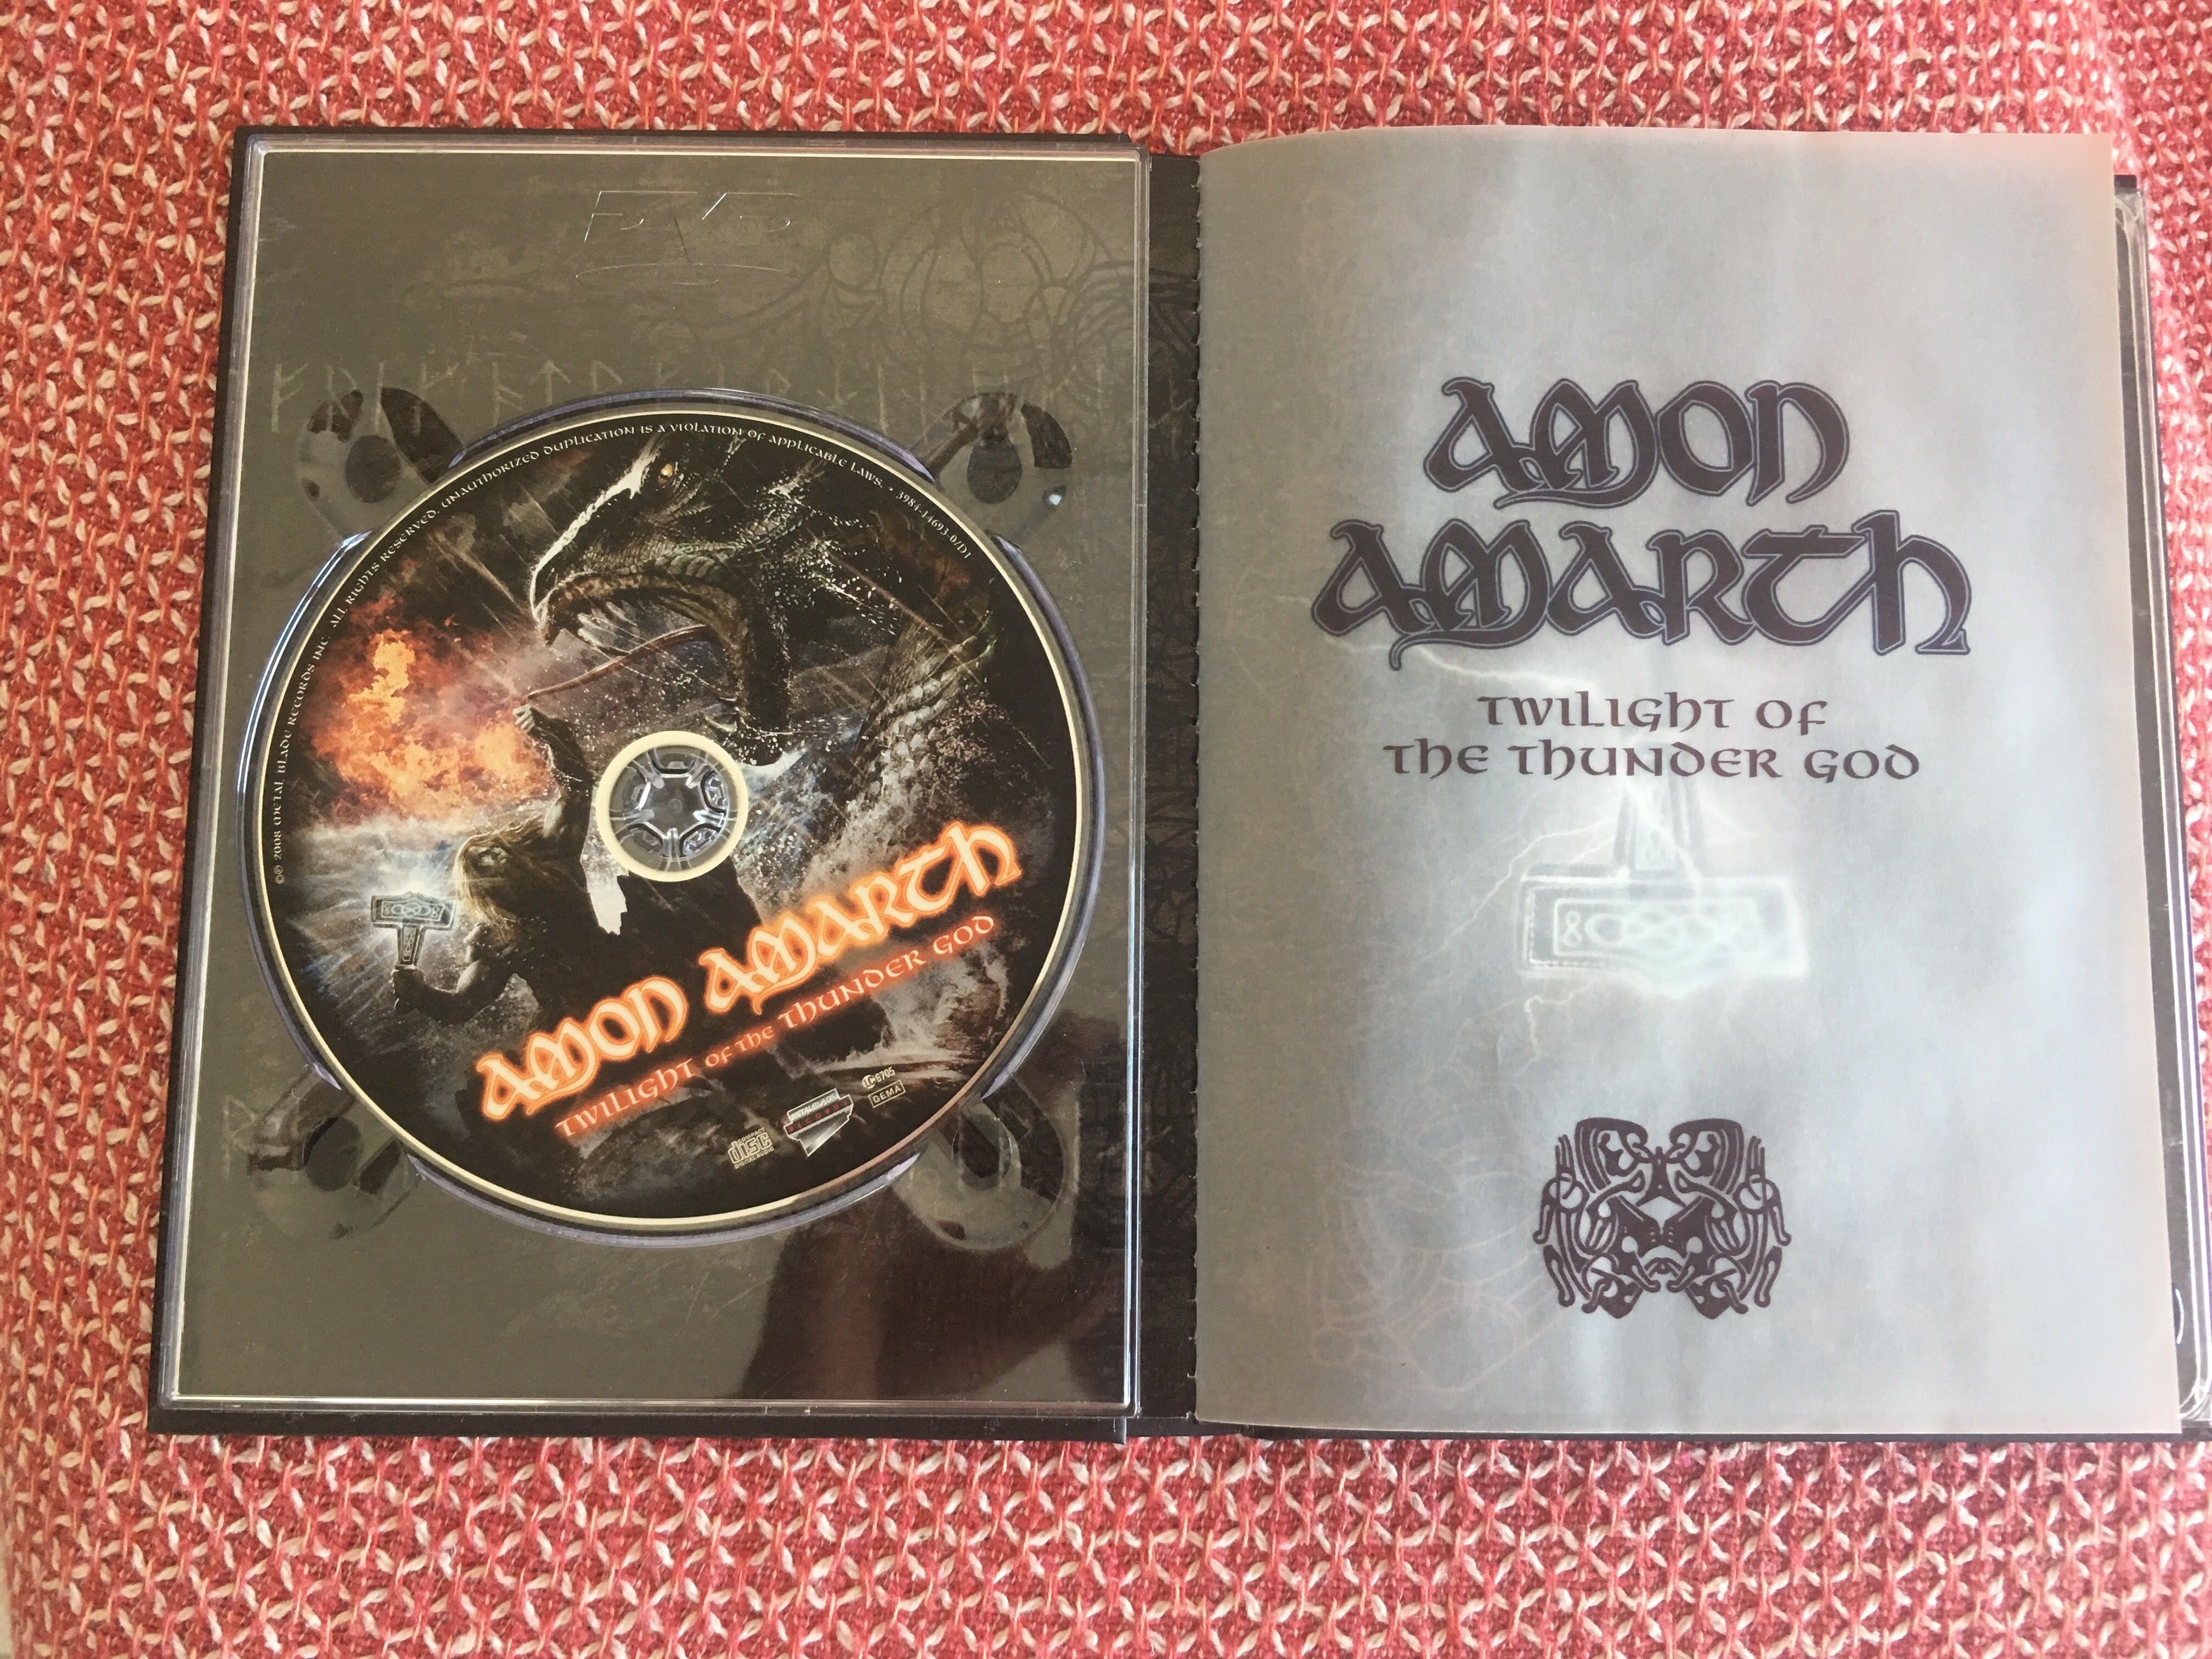 Amon Amarth - Twilight of the Thunder God - digibook deluxe edition